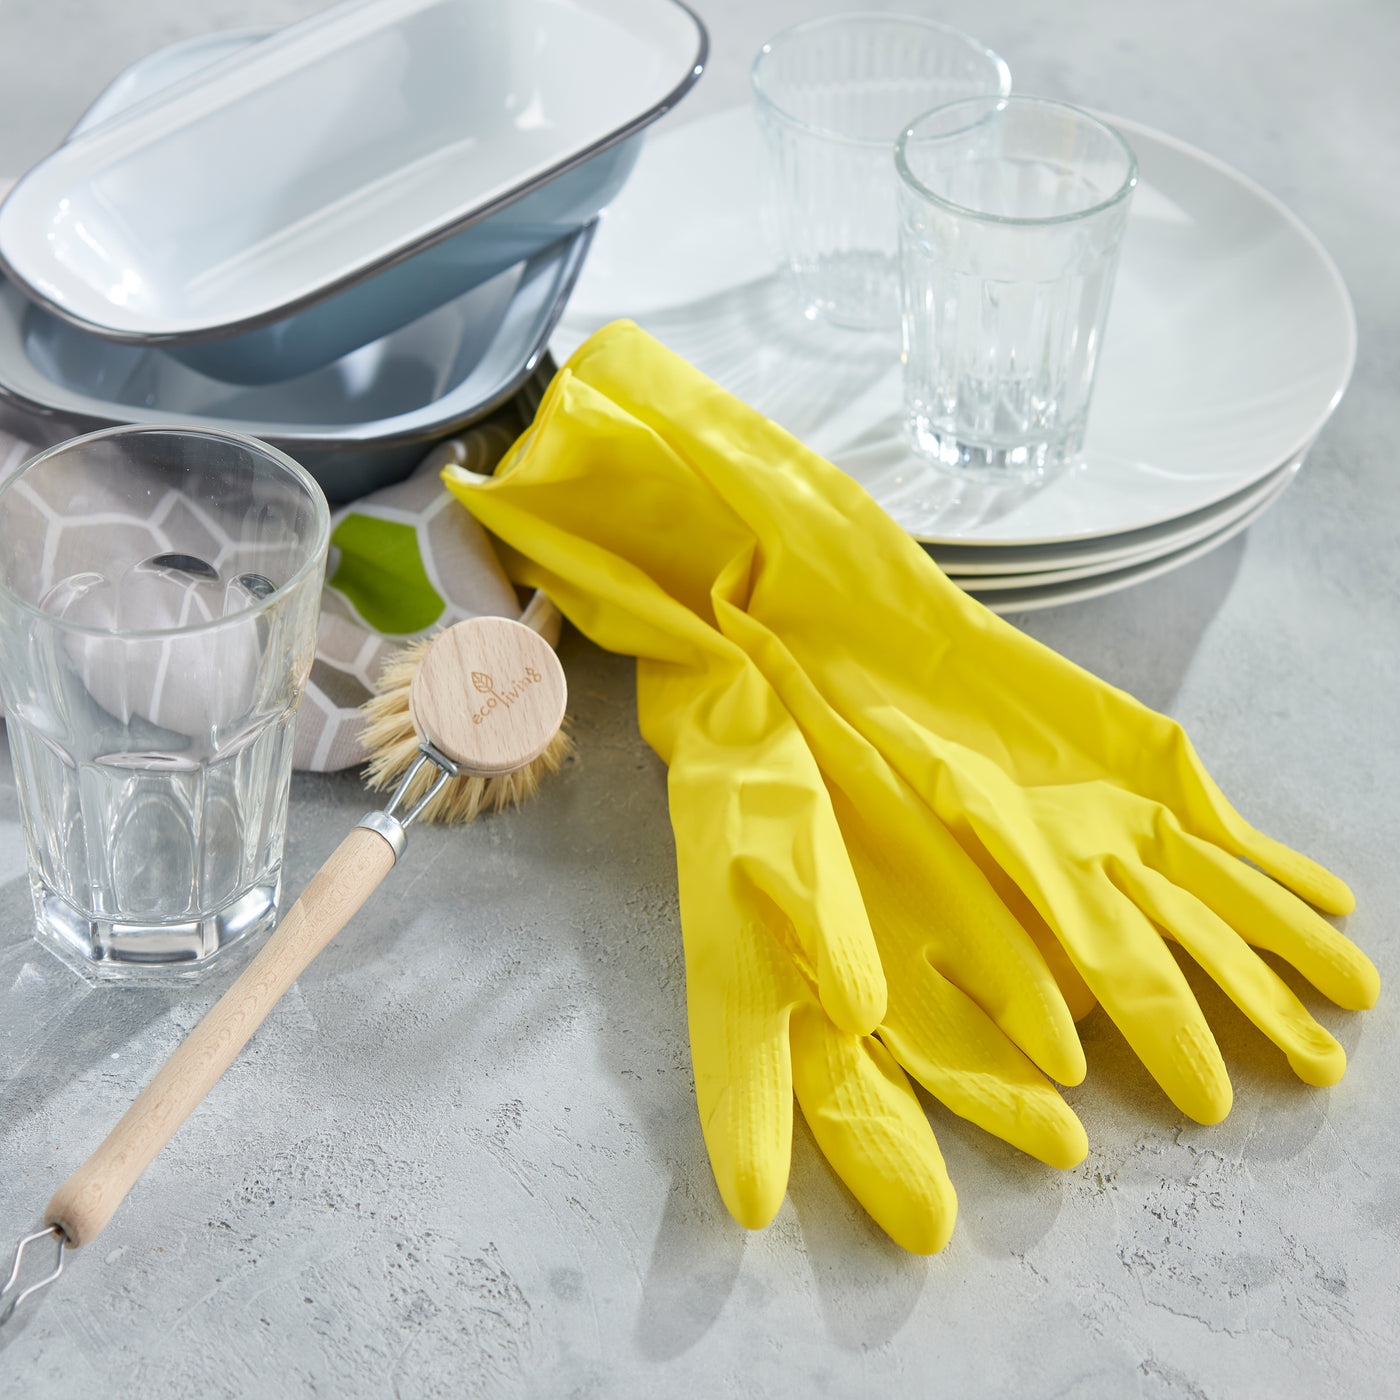 Ecoliving Natural Latex Rubber Gloves - Various Sizes